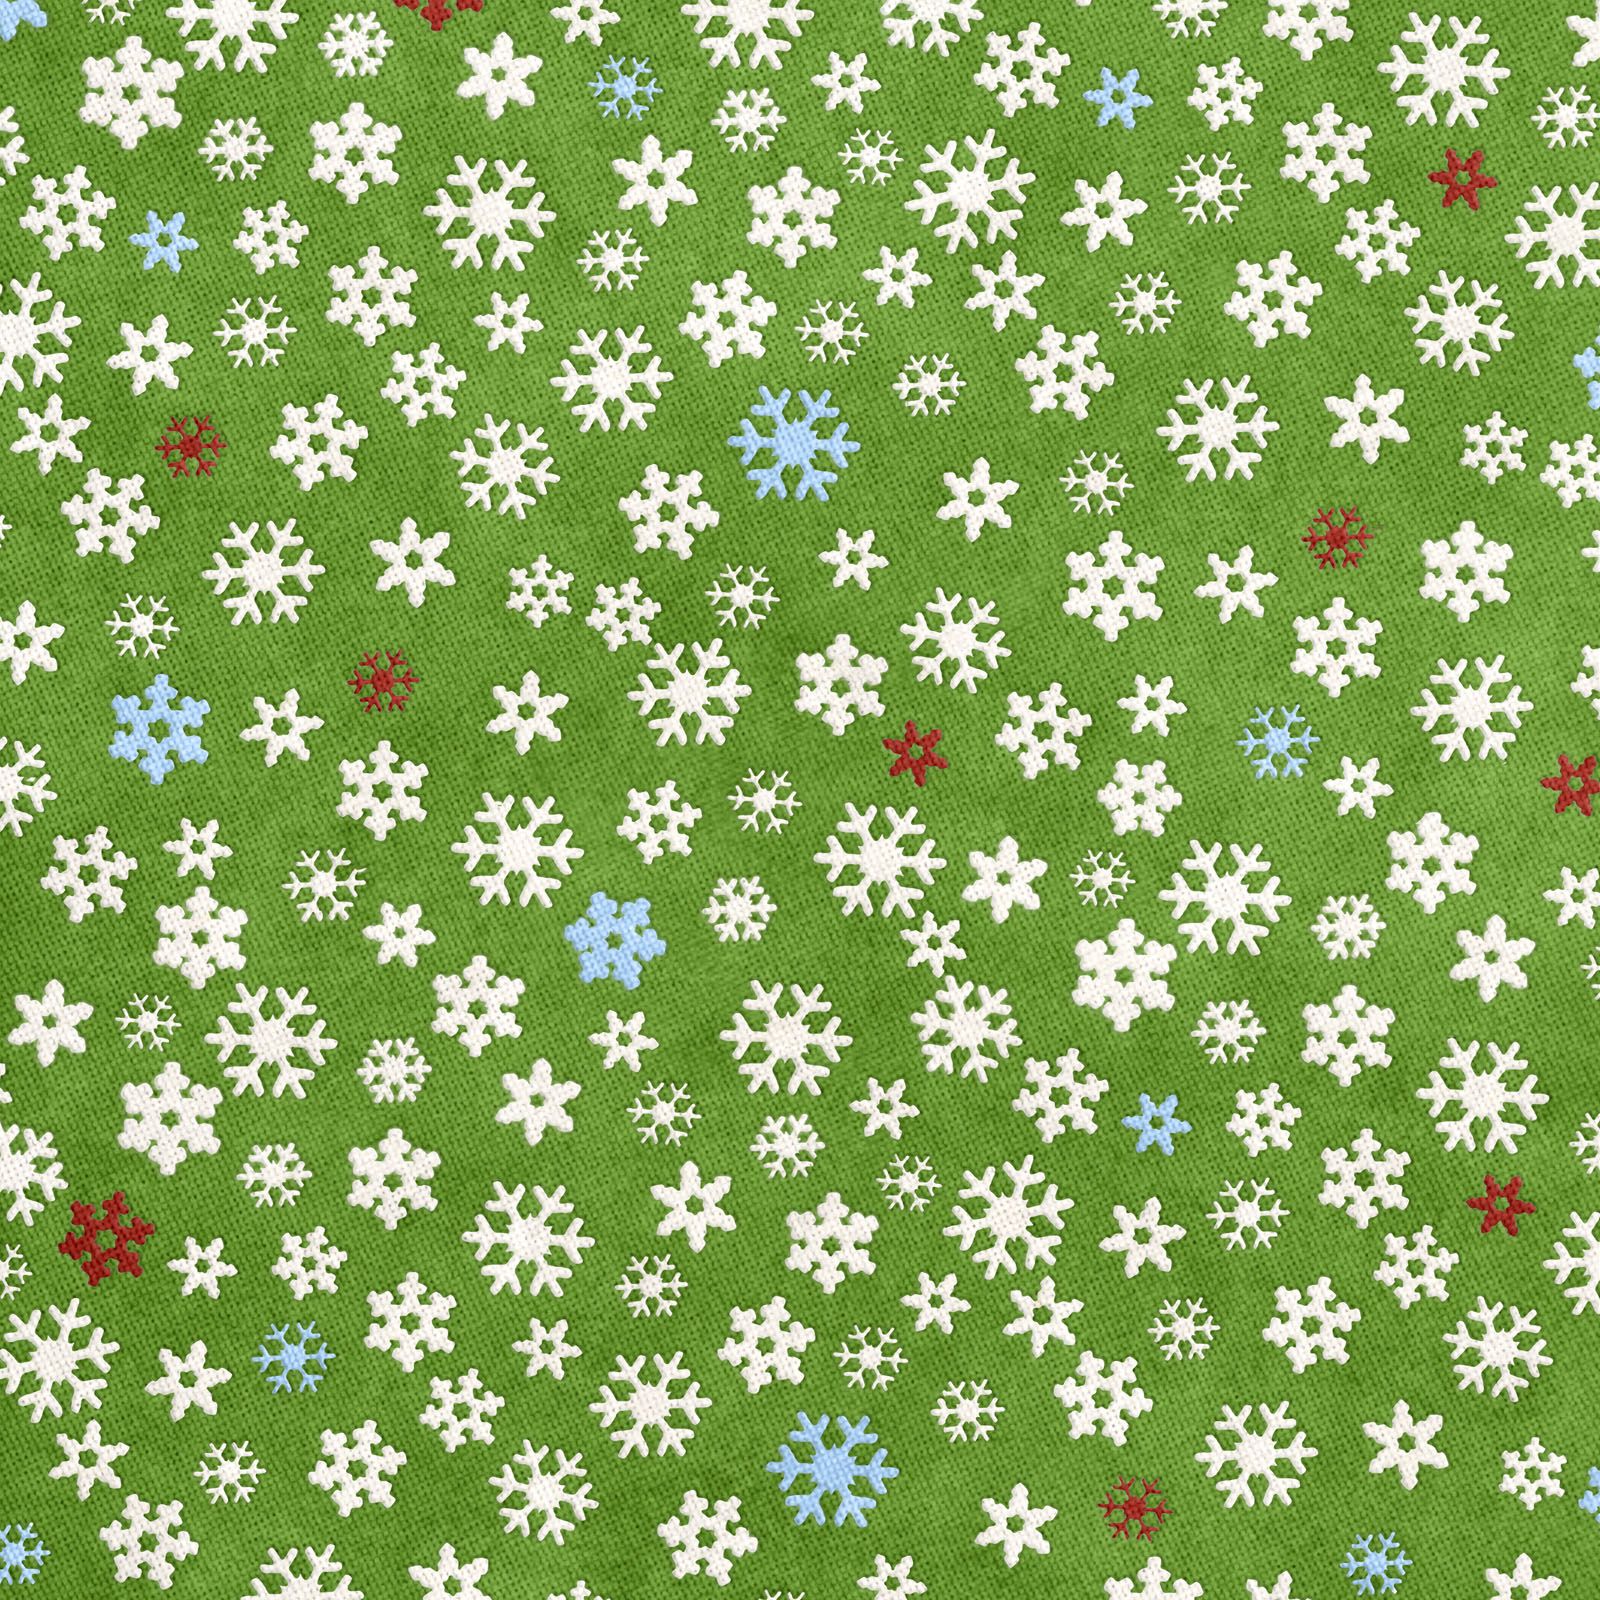 Free Printable Christmas Wrapping or Scrapbook Paper : IMG HEAVY ...